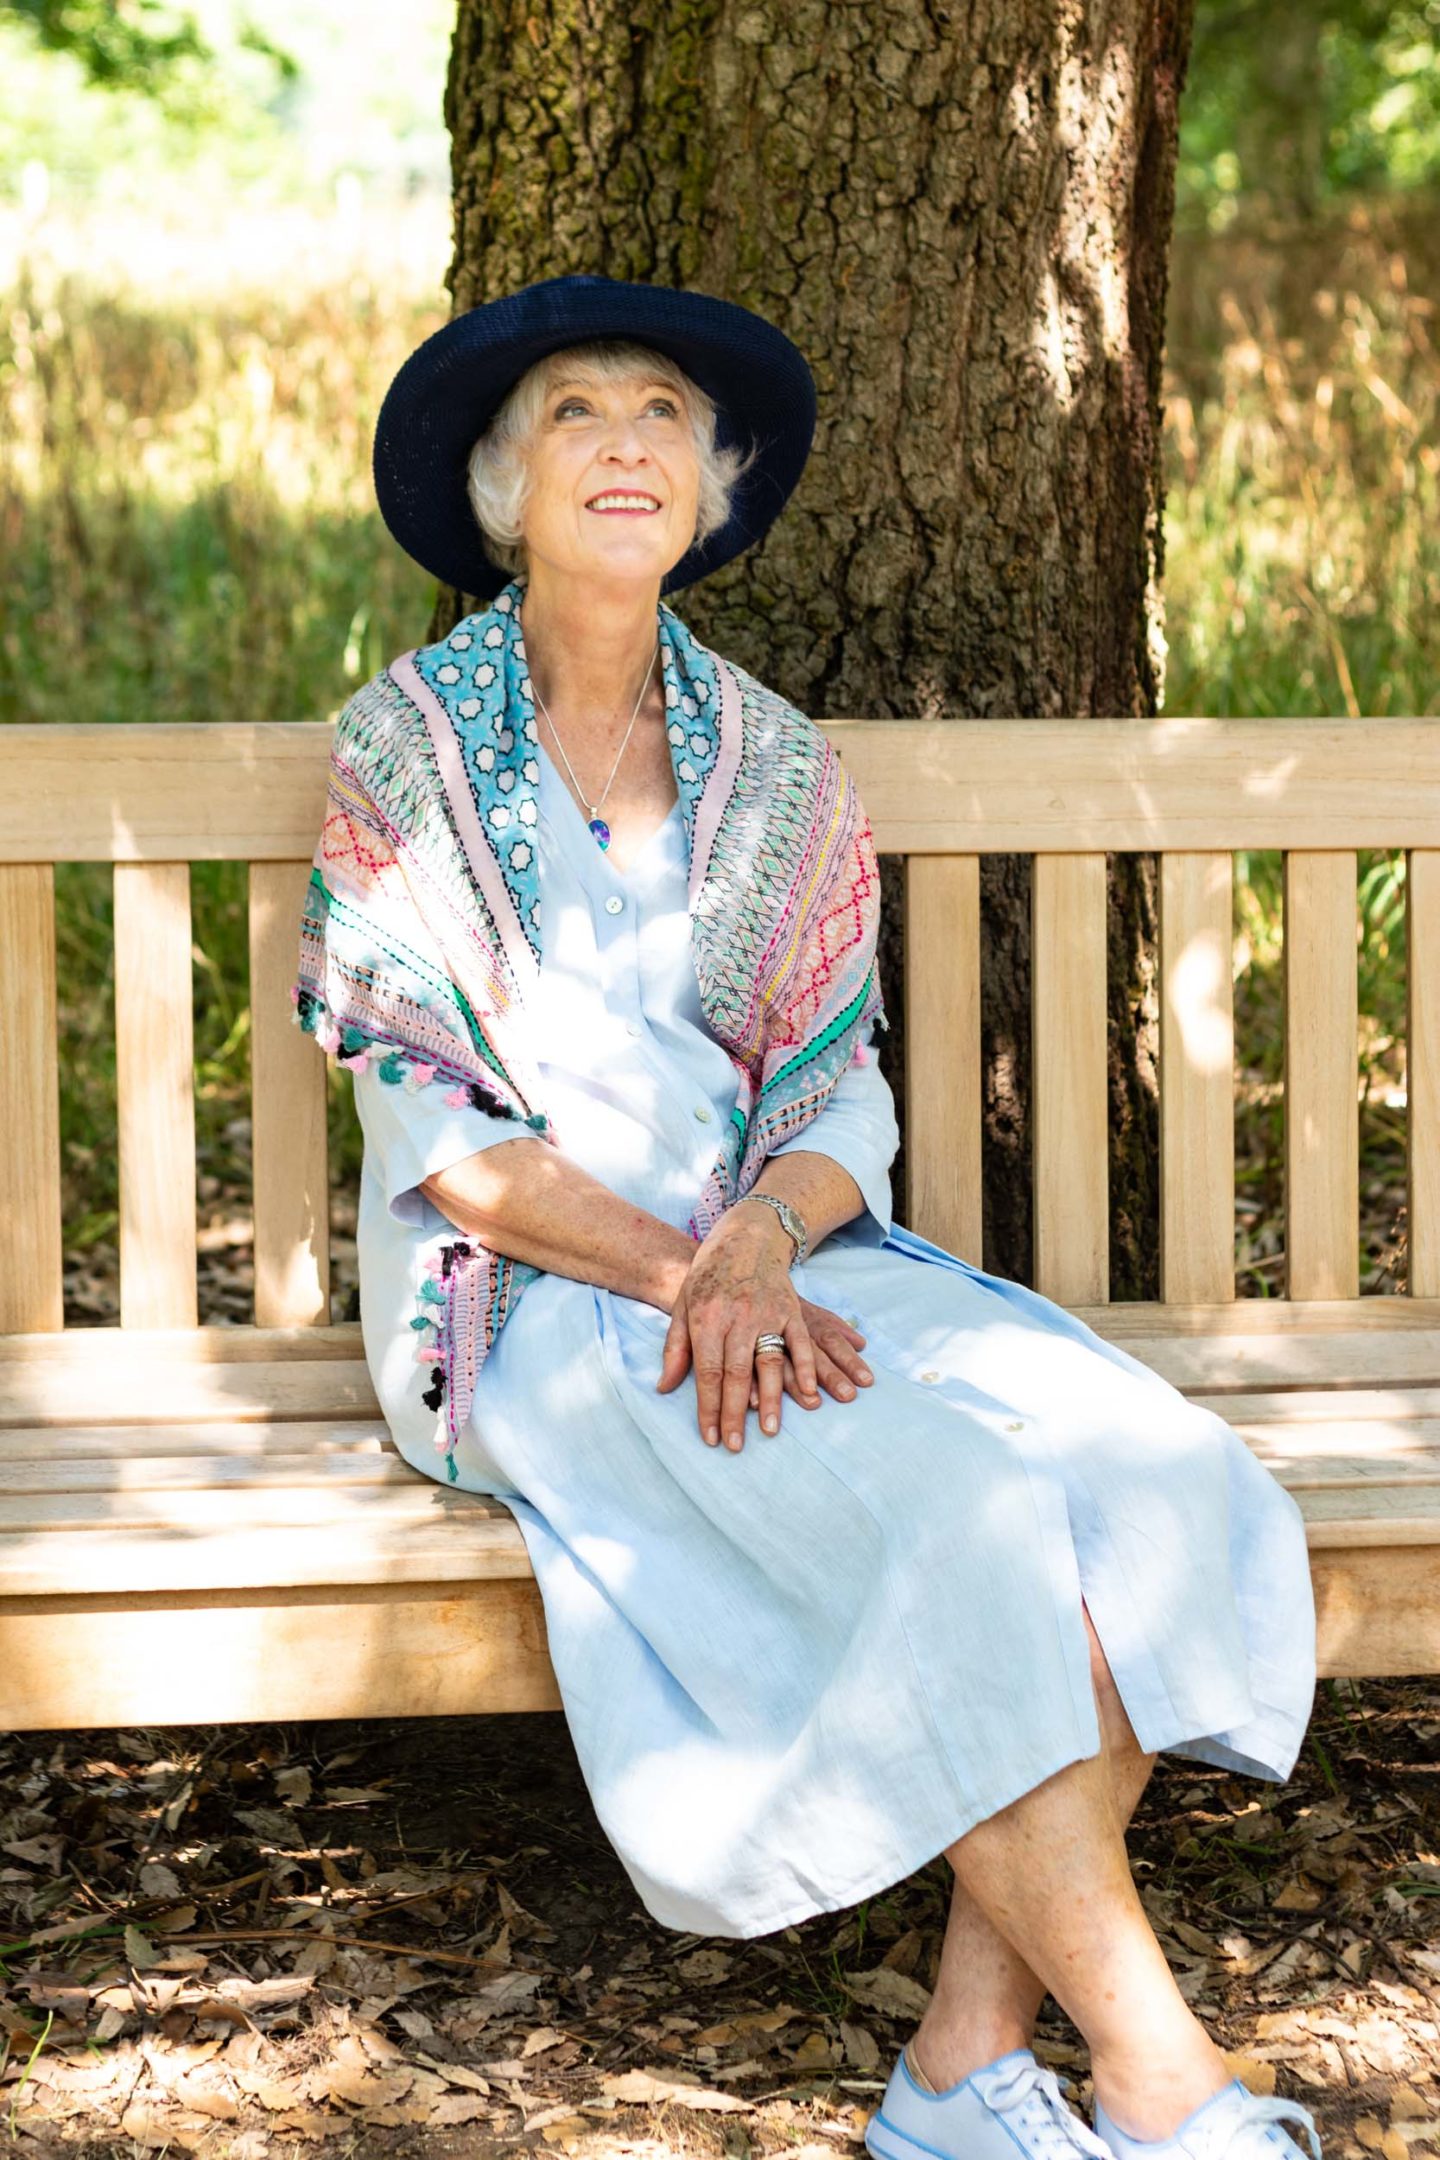 "Chic at any age" with Josephine Lalwan